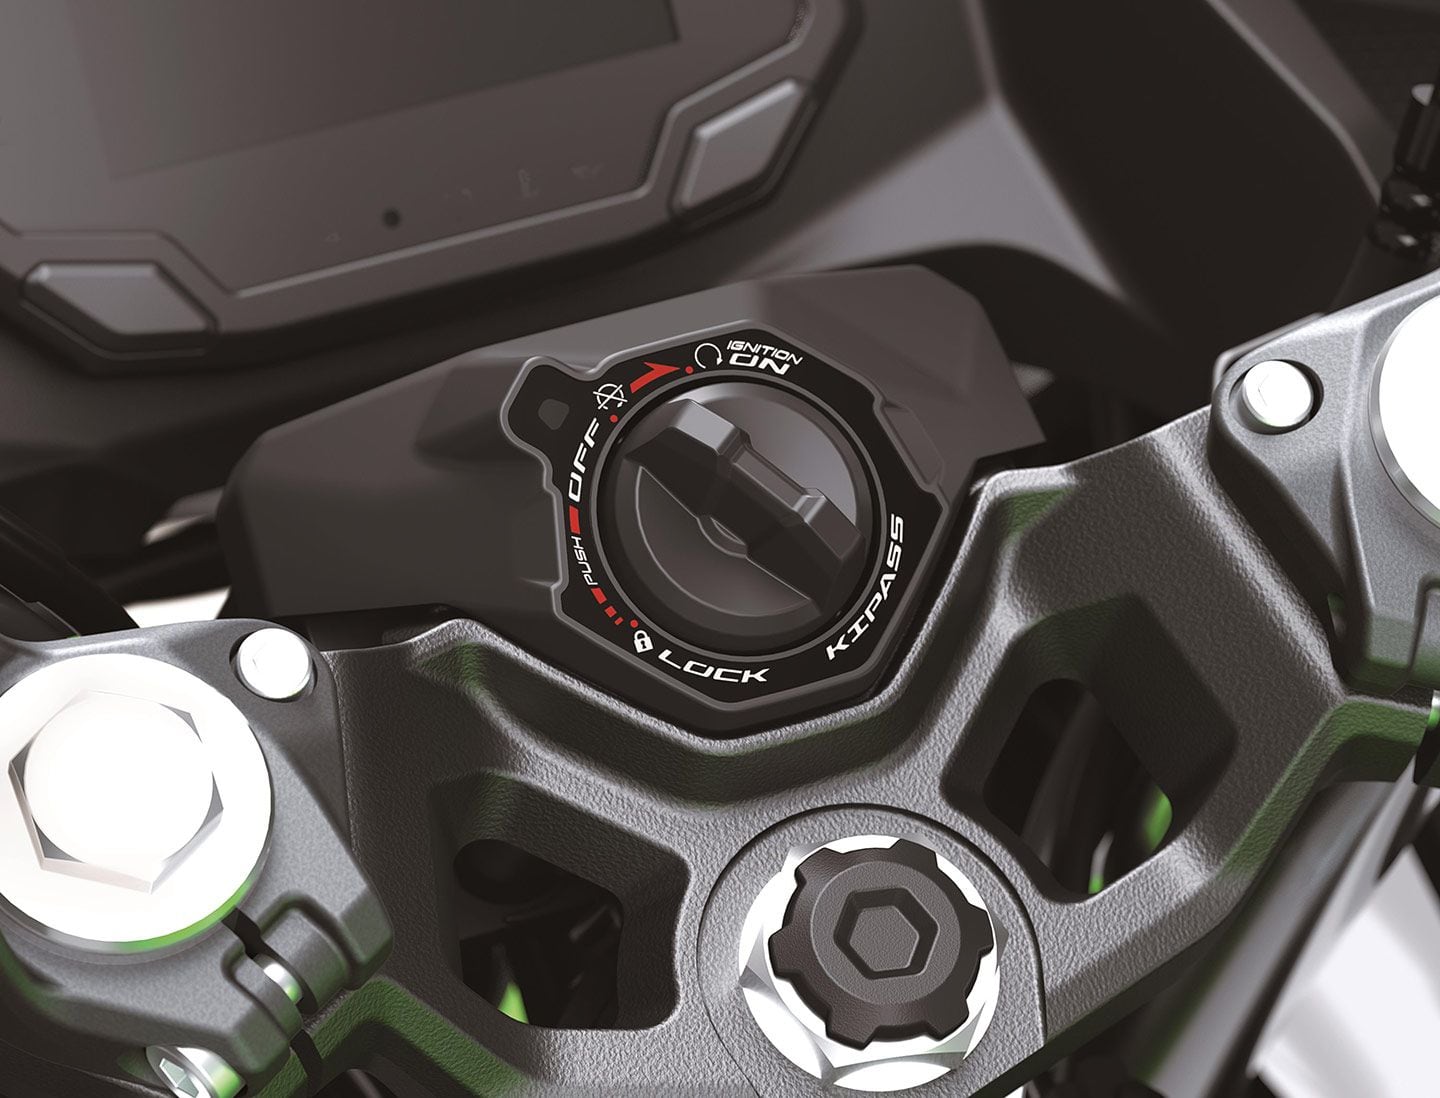 Kawasaki’s keyless ignition system: a luxurious choice for an entry-level sportbike.